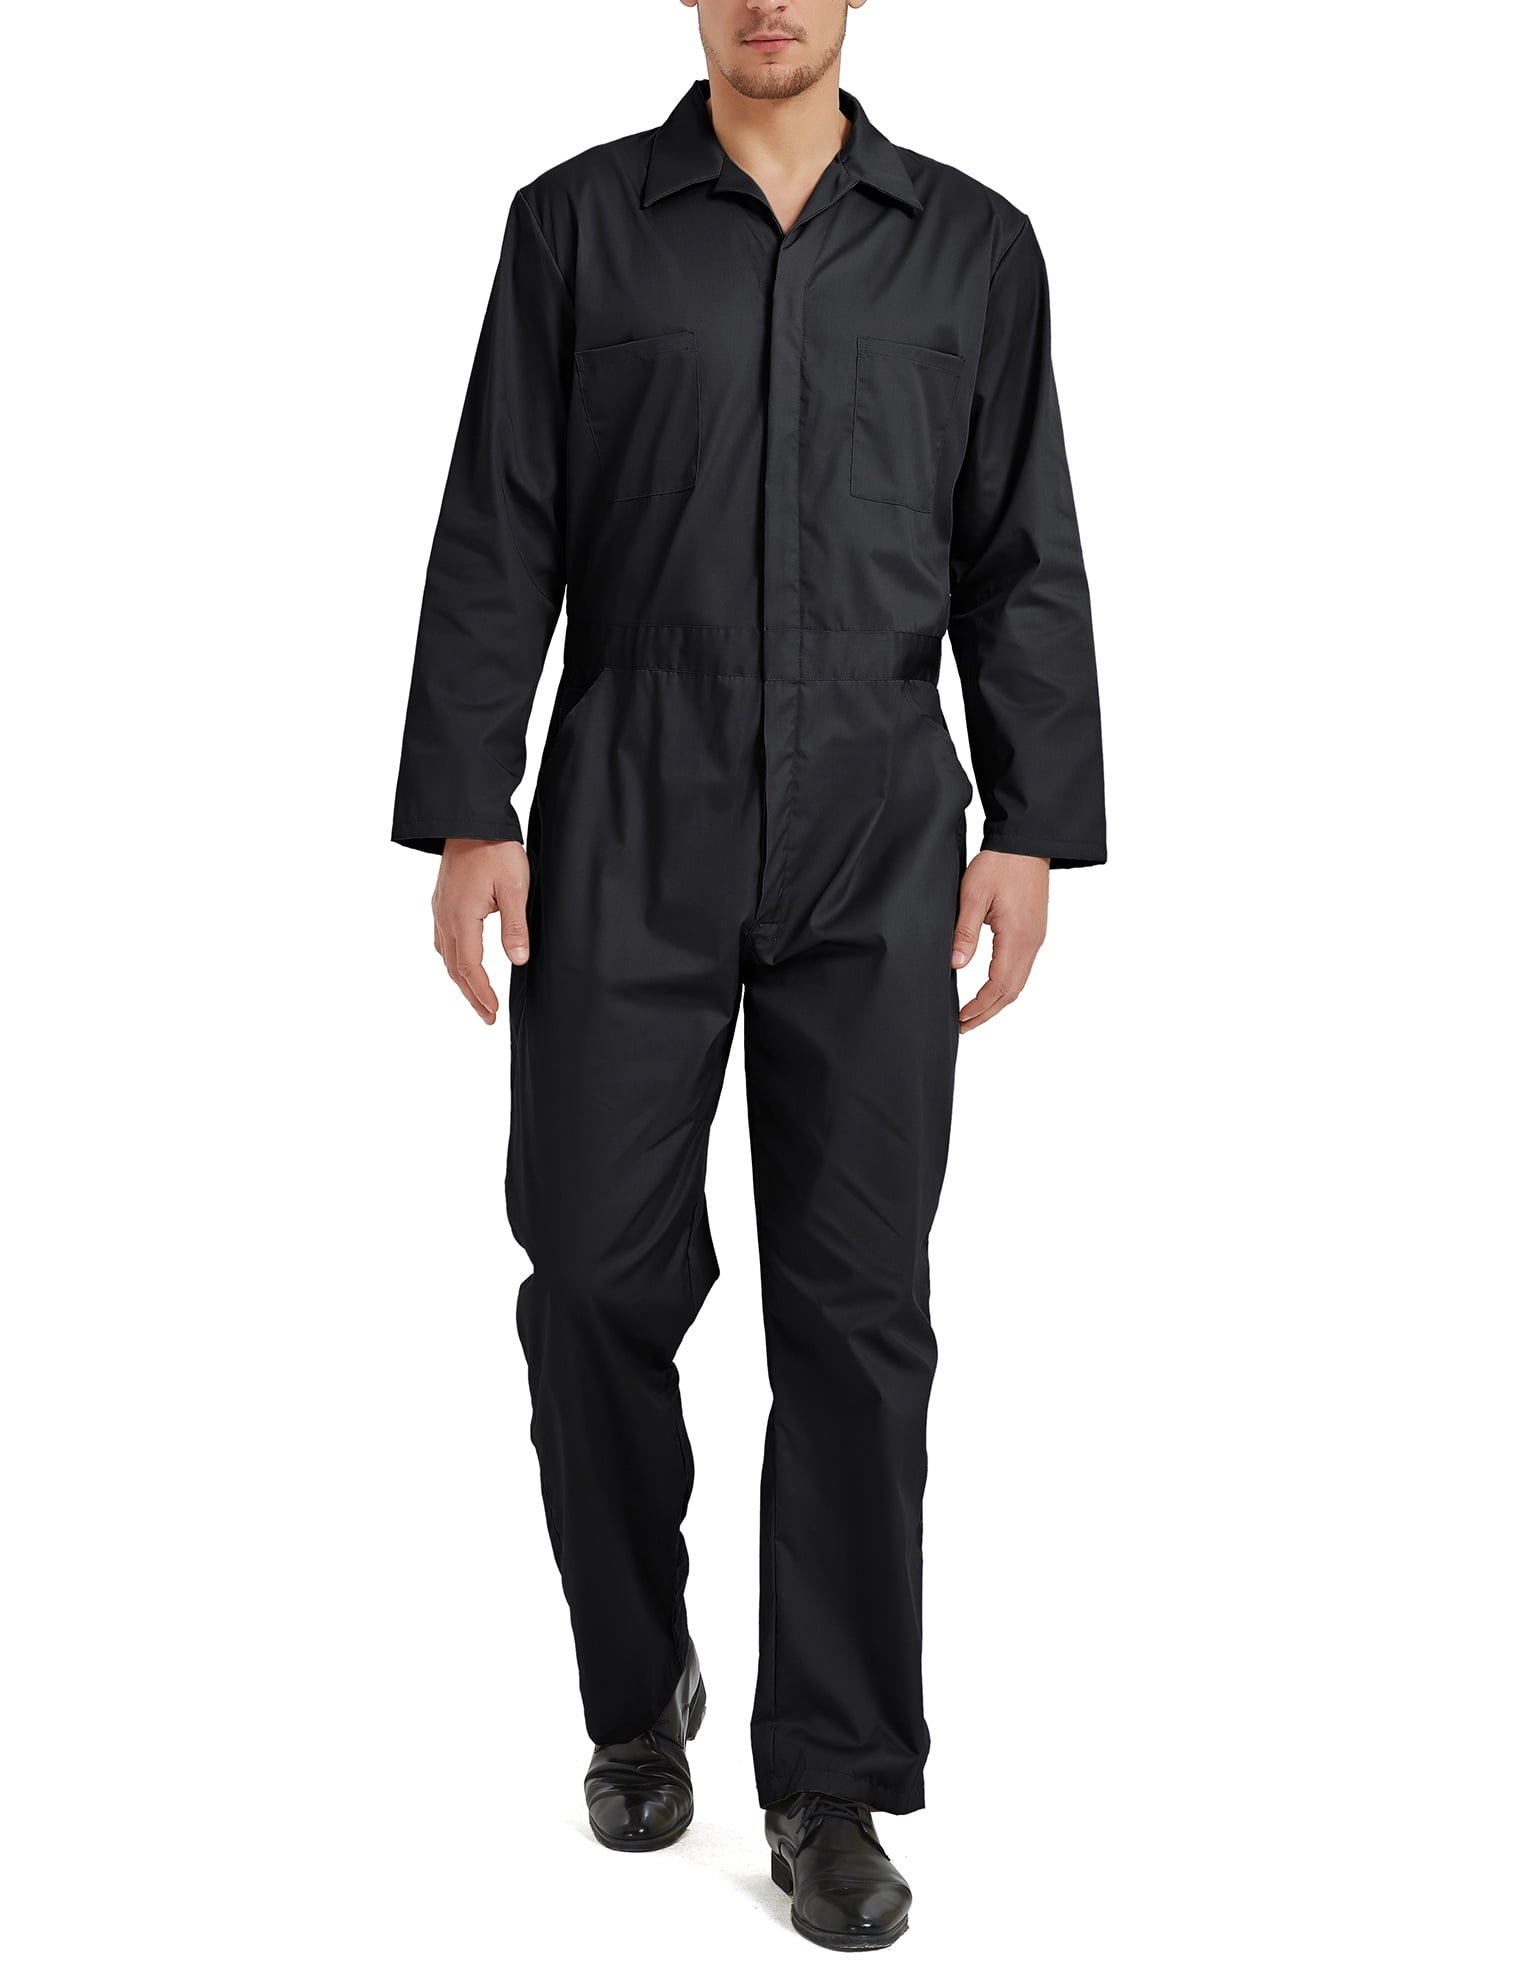 Twill Stain & Wrinkle Resistant Work Coverall Action Back Jumpsuit with Multi Pockets CQR Men's Long Sleeve Zip-Front Coverall 